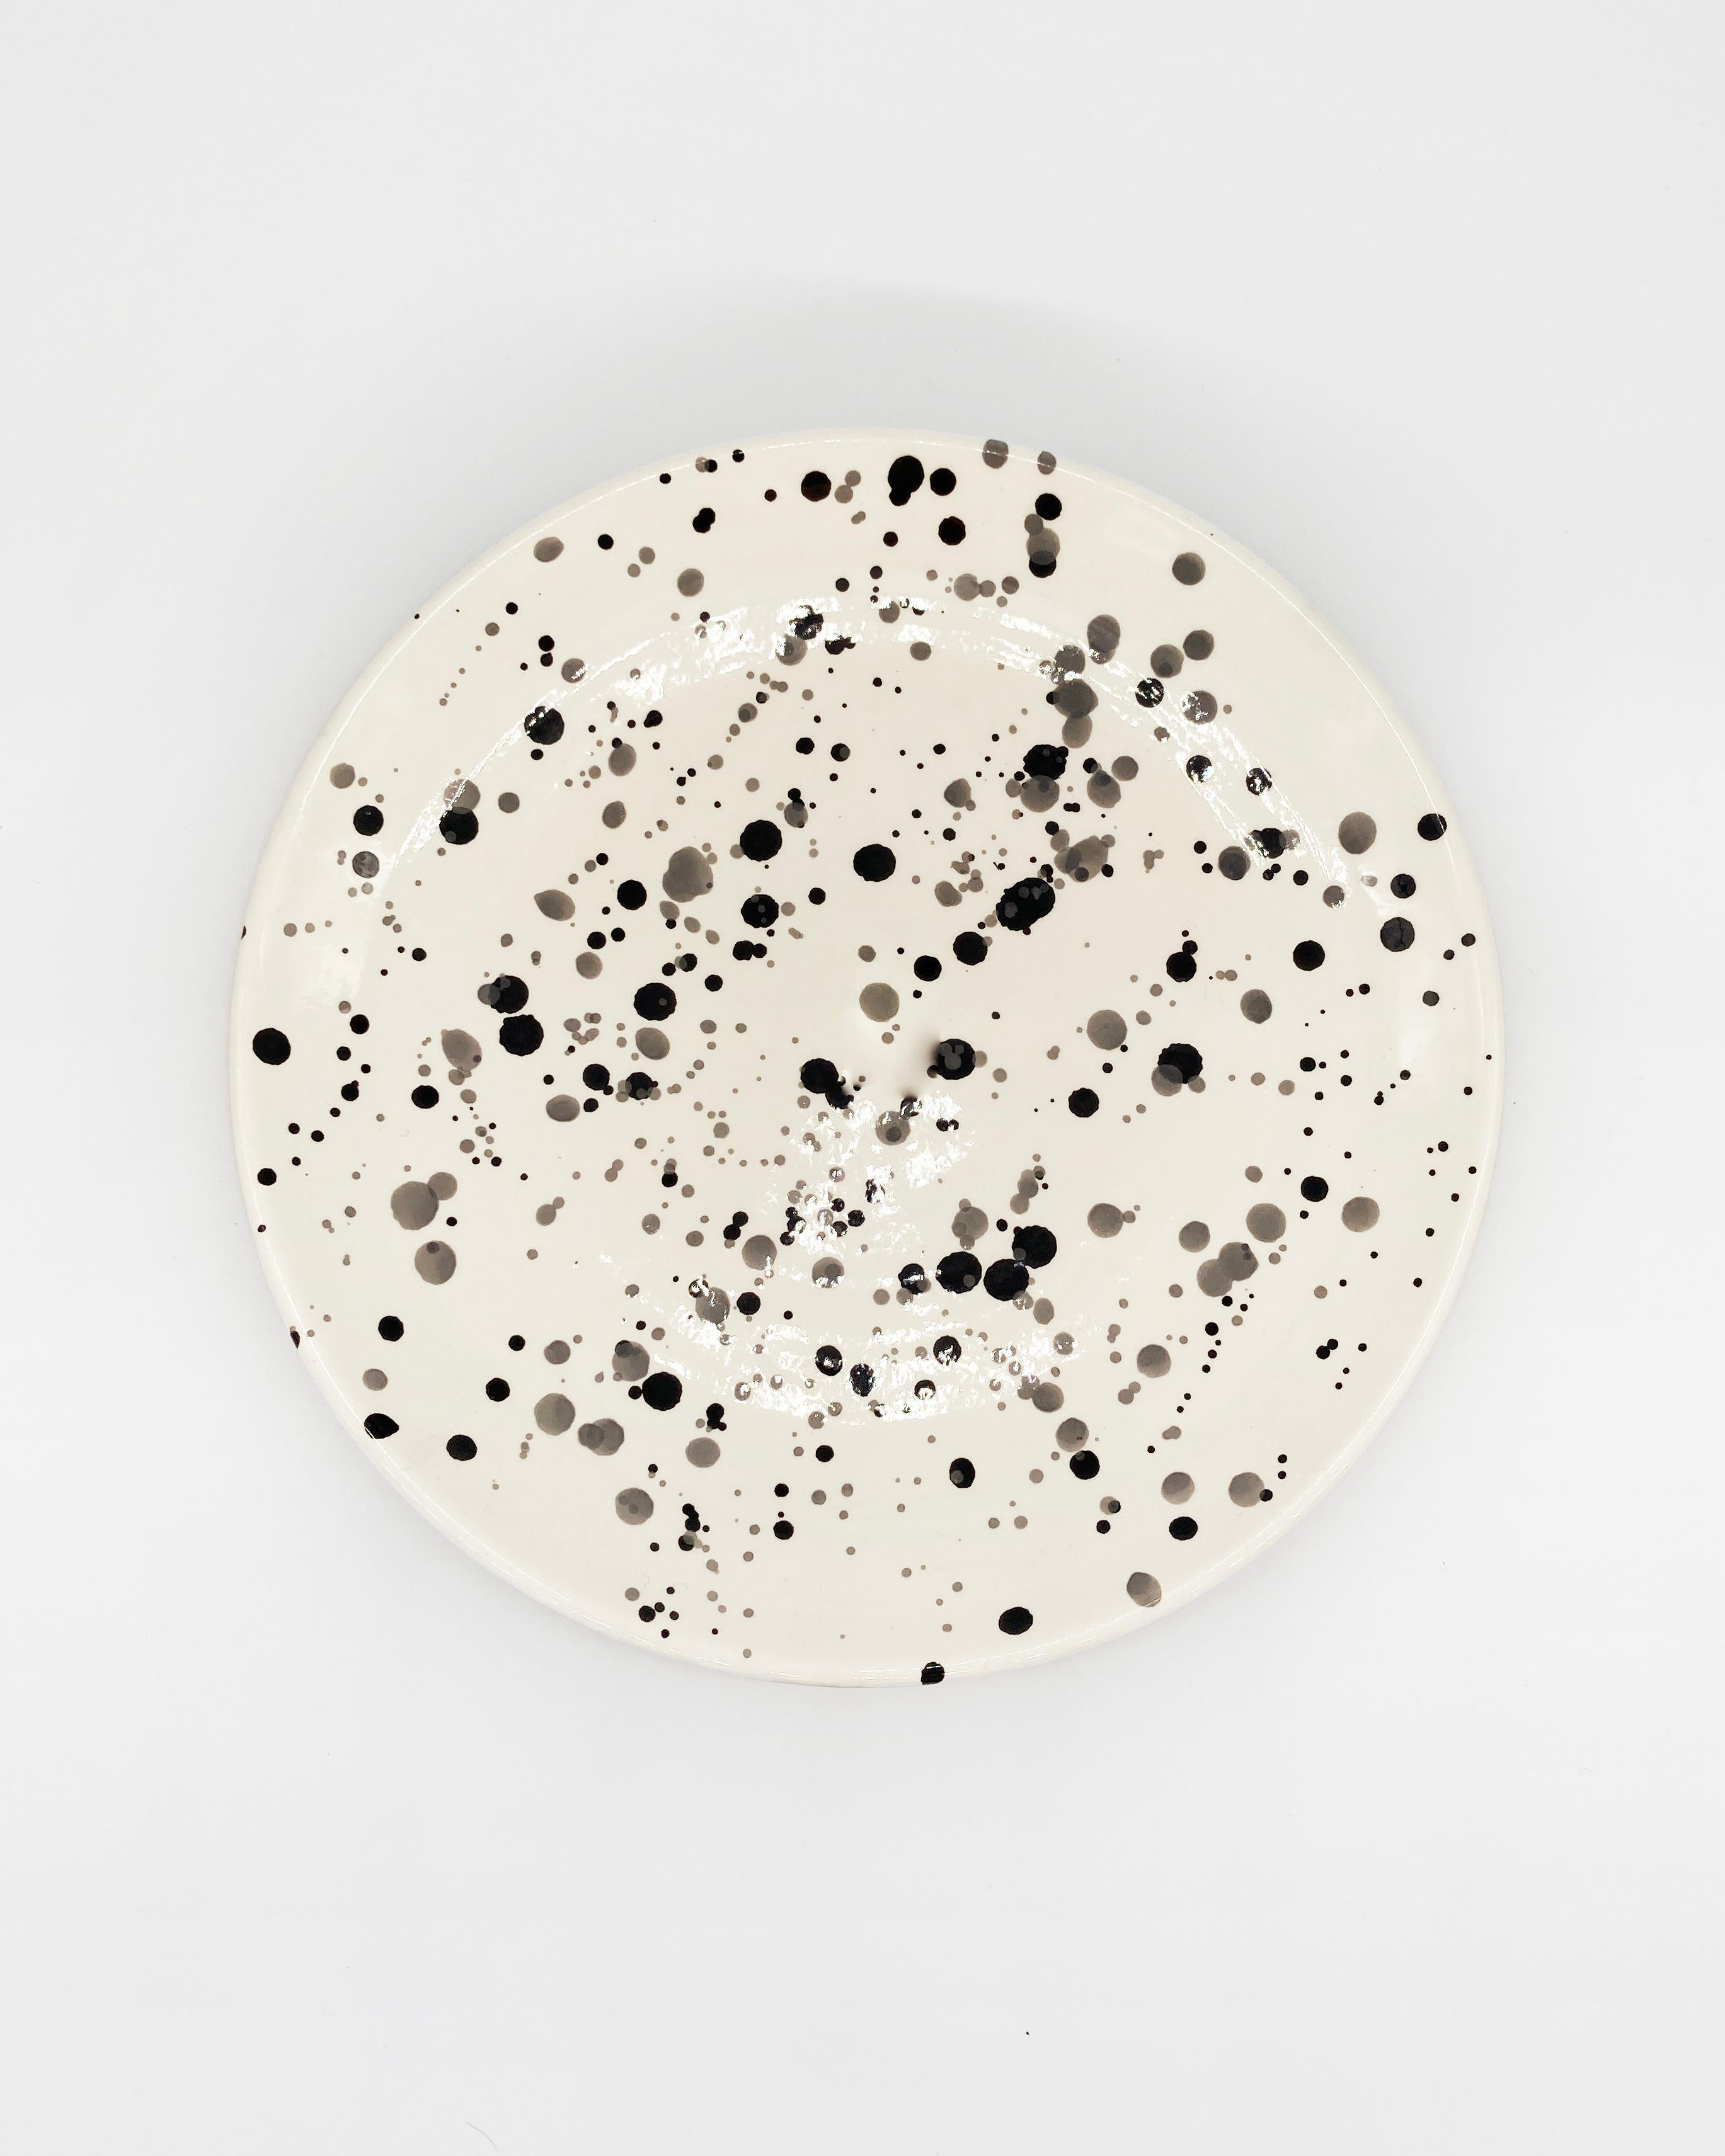 Handmade and hand-painted ceramics from one of the mother countries, Portugal, these beautiful pieces for your table will add a modern and graphic touch and are perfect to mix and match. These polkadot plates are available in dinner and salad plate